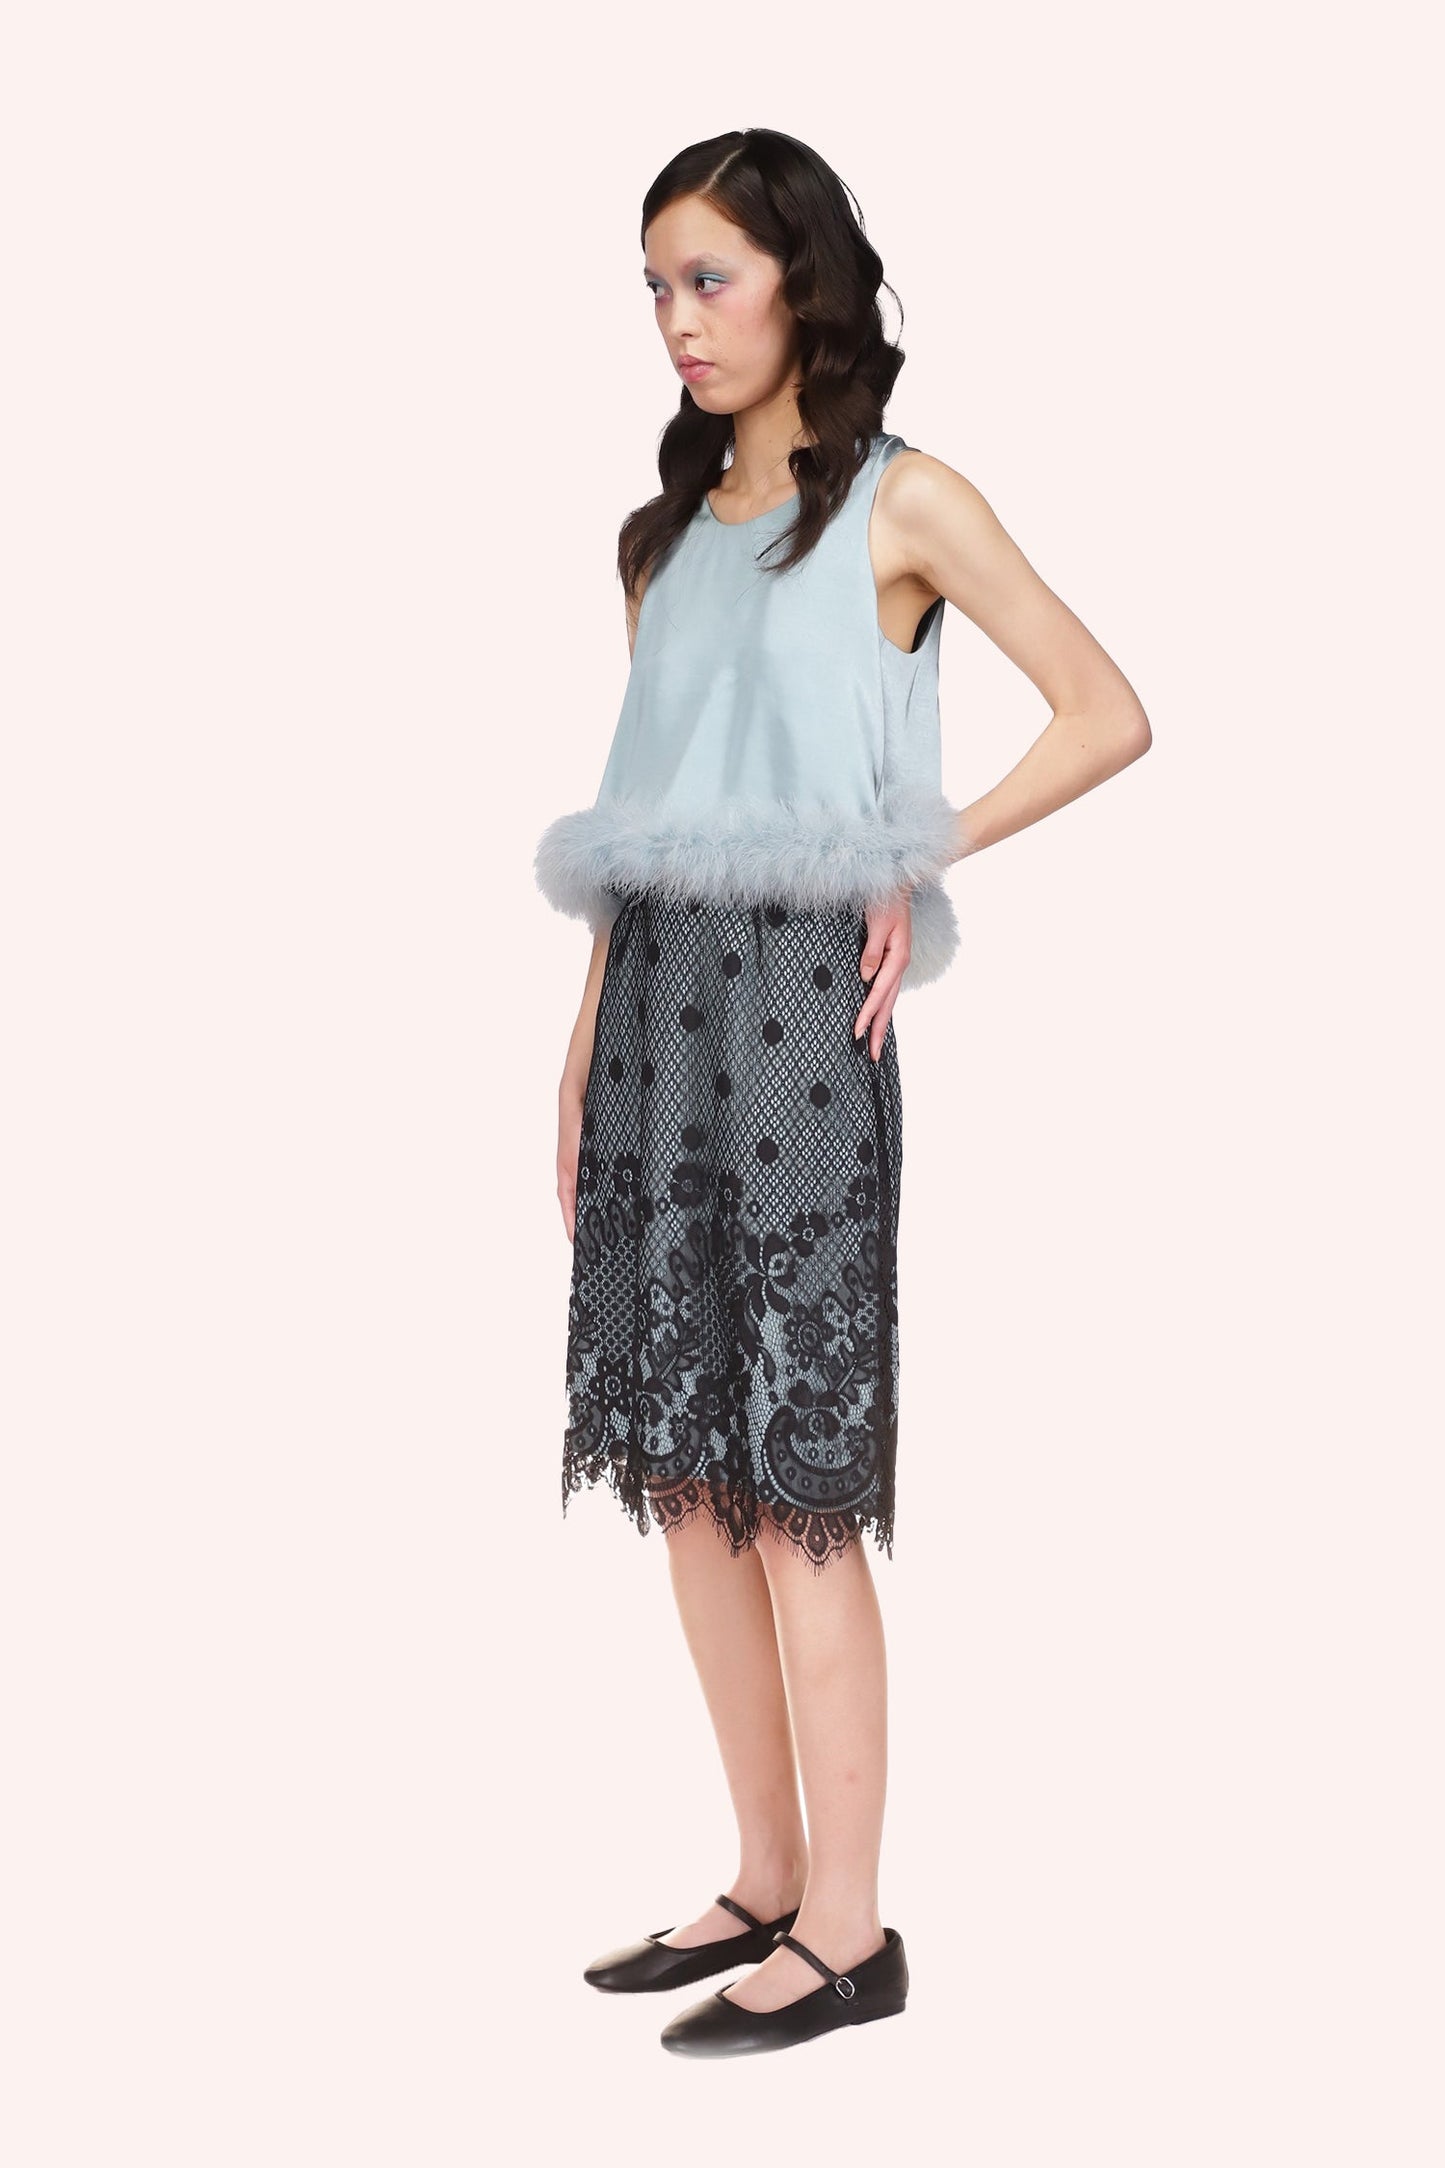 Washed Dusty Blue Satin with Lace Top Trimmed with Marabou Feather at waistline, round collar